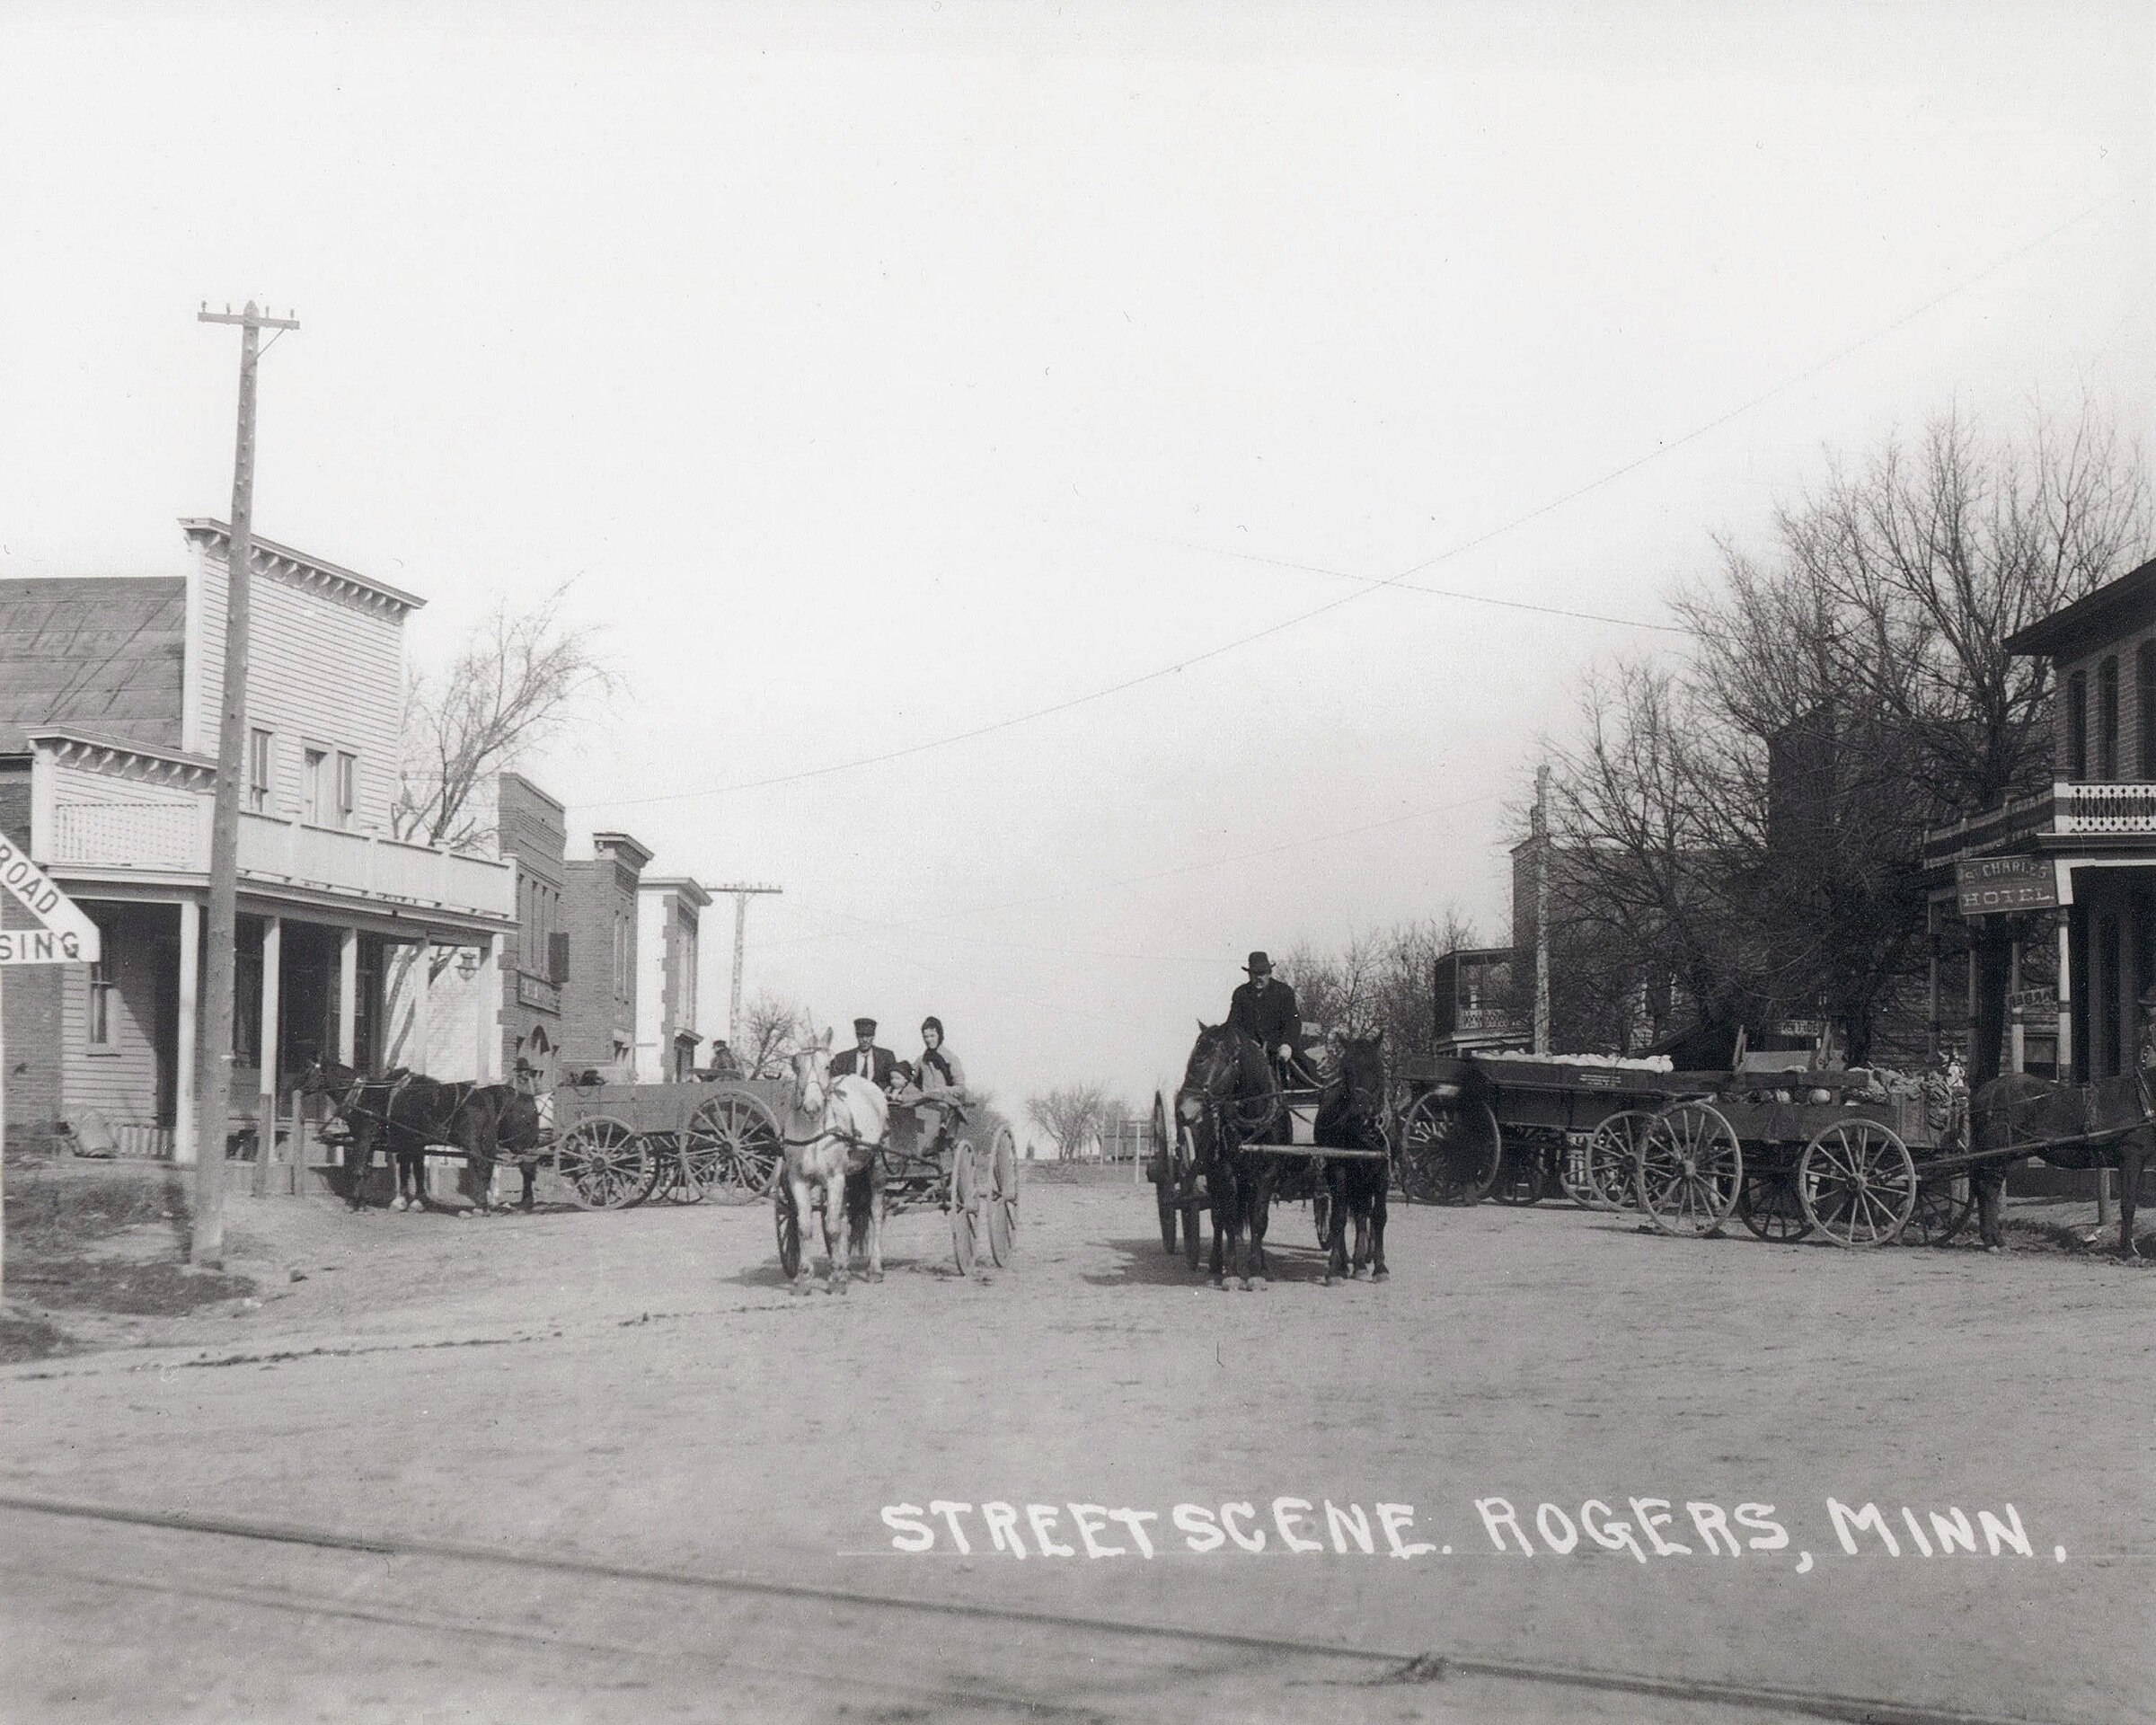 Rogers Main Street 1914 with wagons